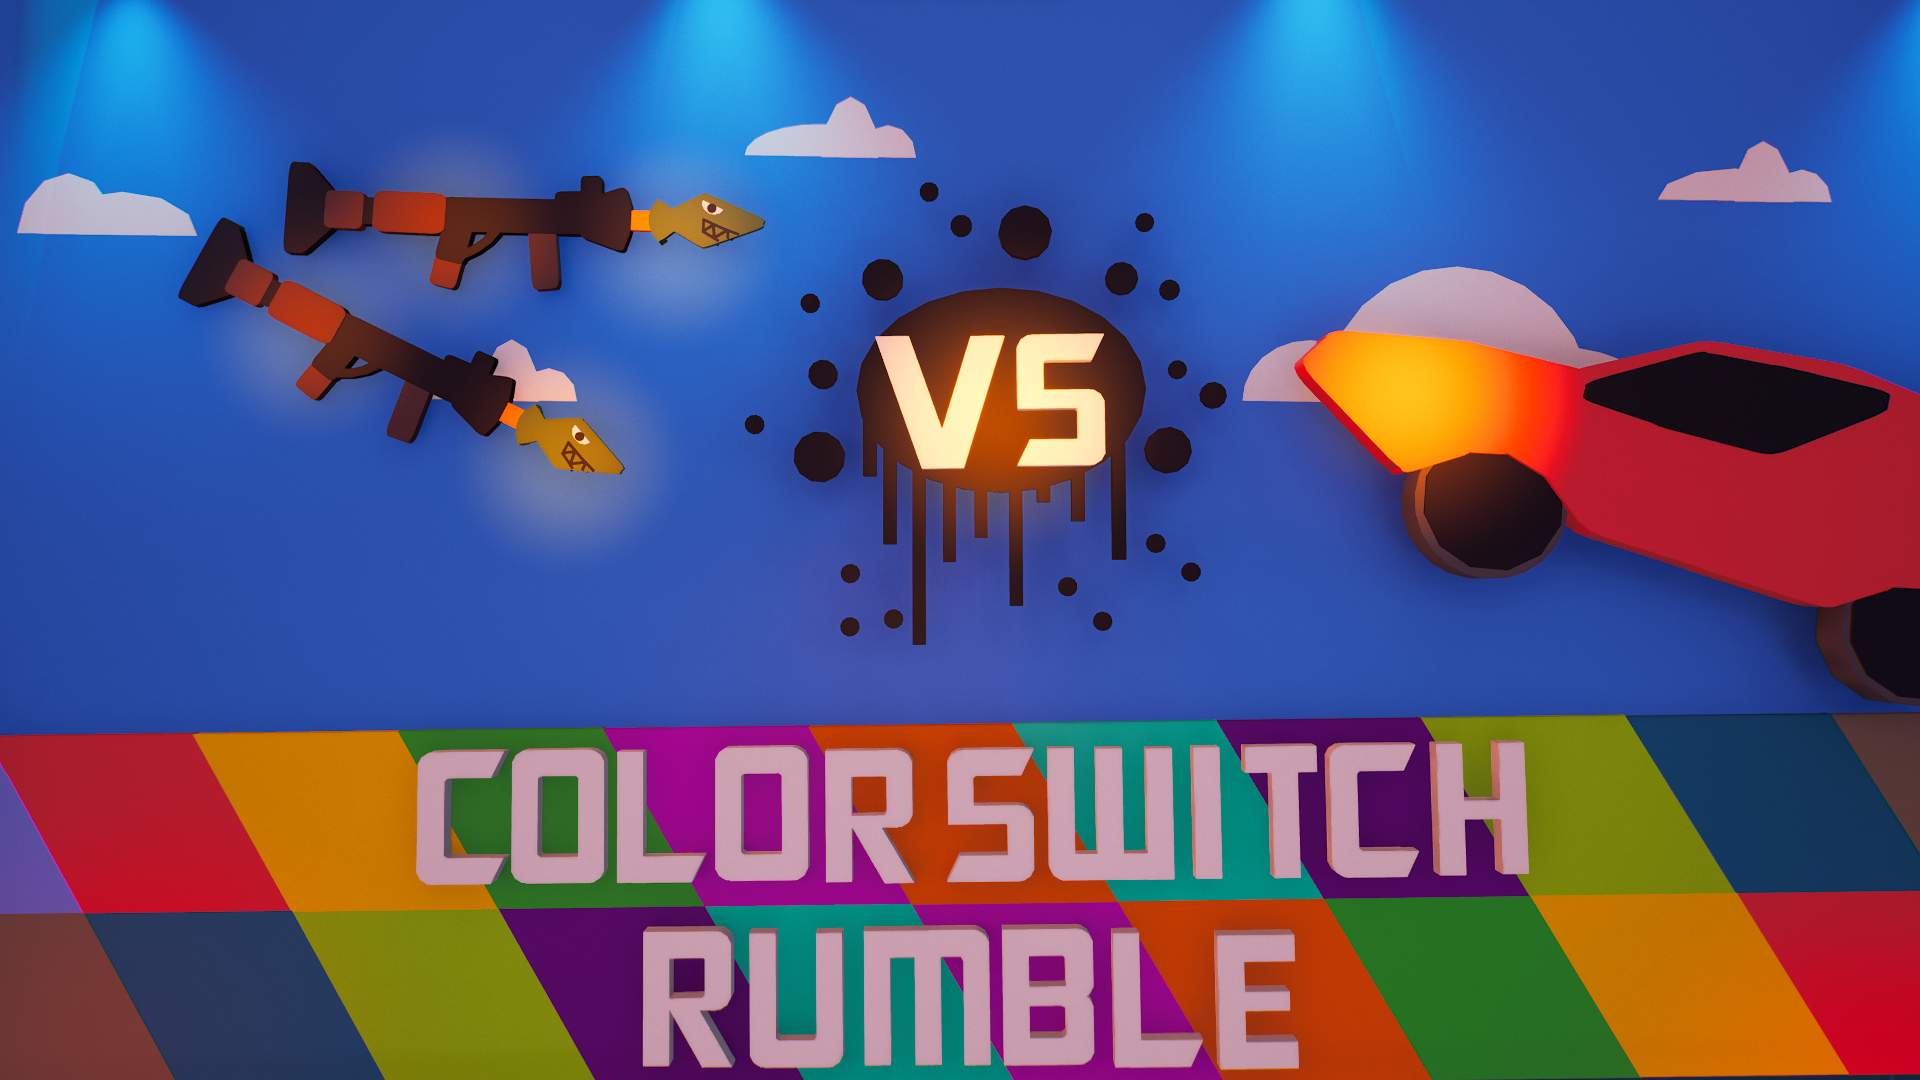 🔴🚘 COLOR SWITCH RUMBLE